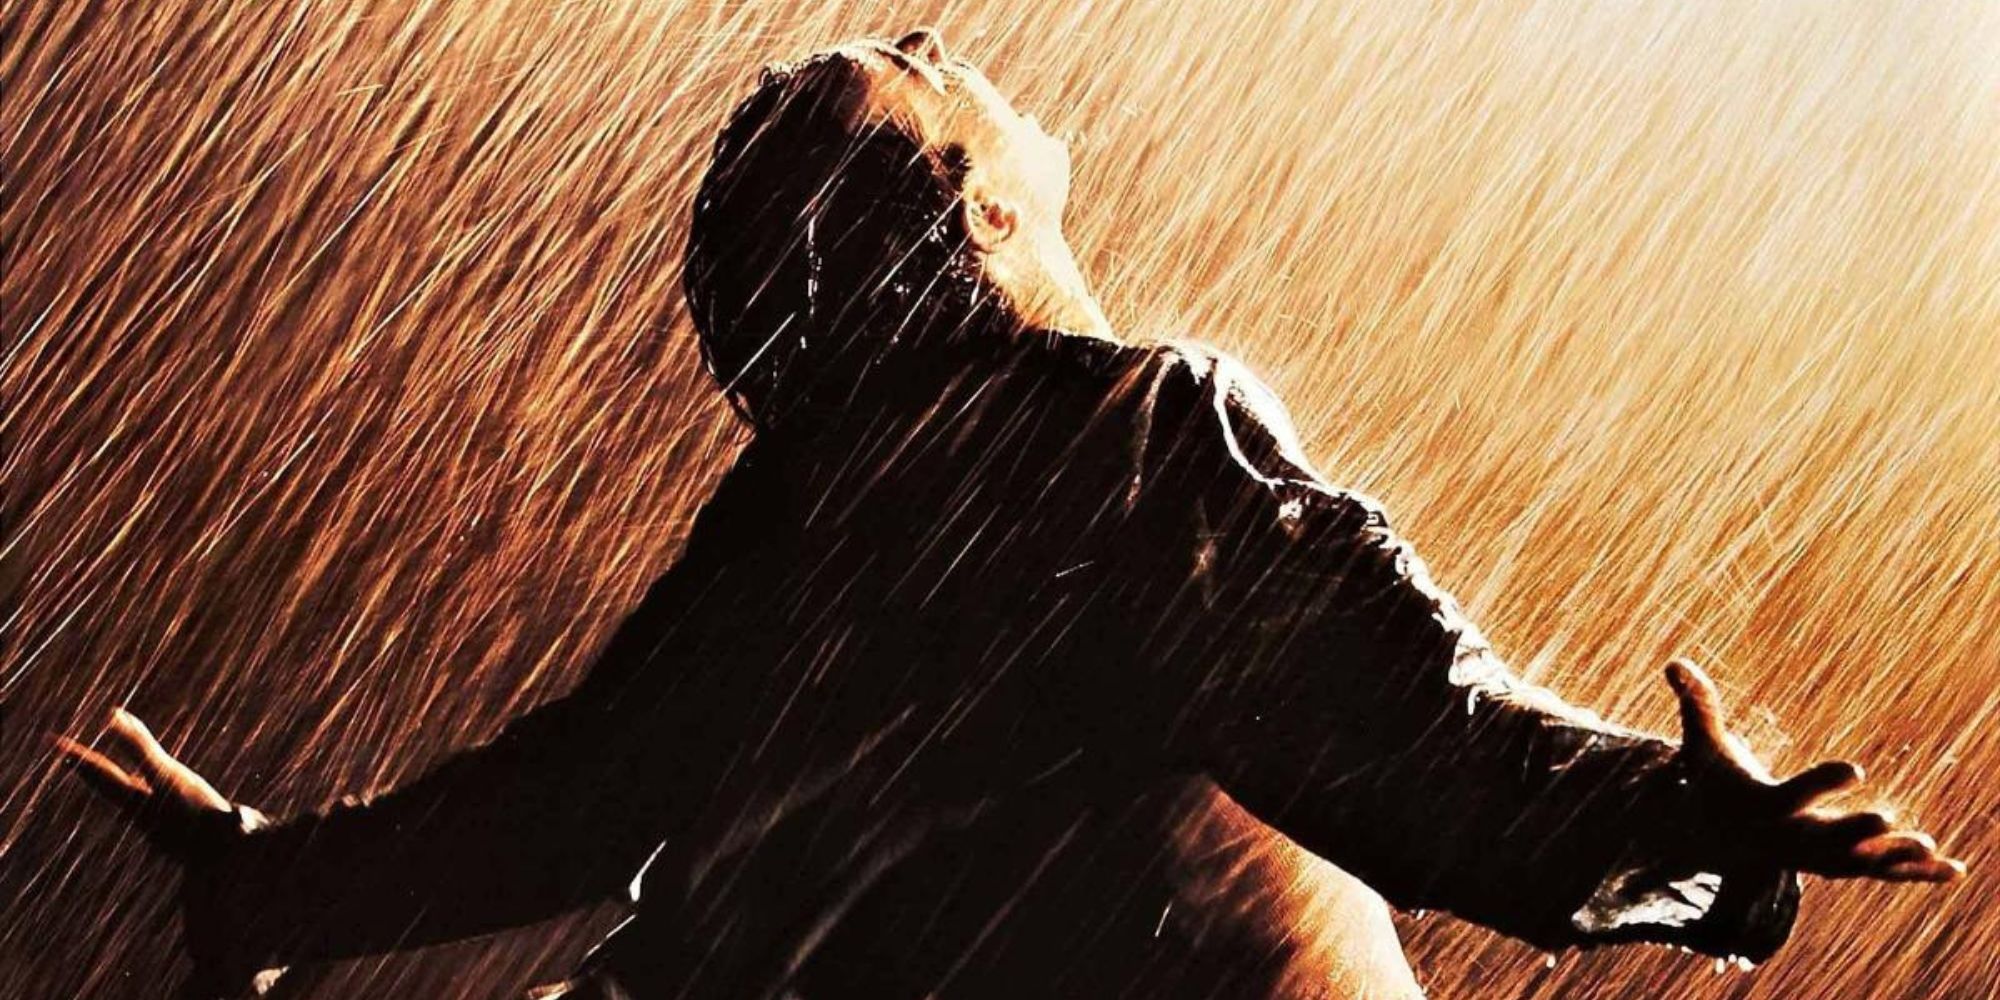 A mand with his arms spread under the rain in The Shawshank Redemption poster